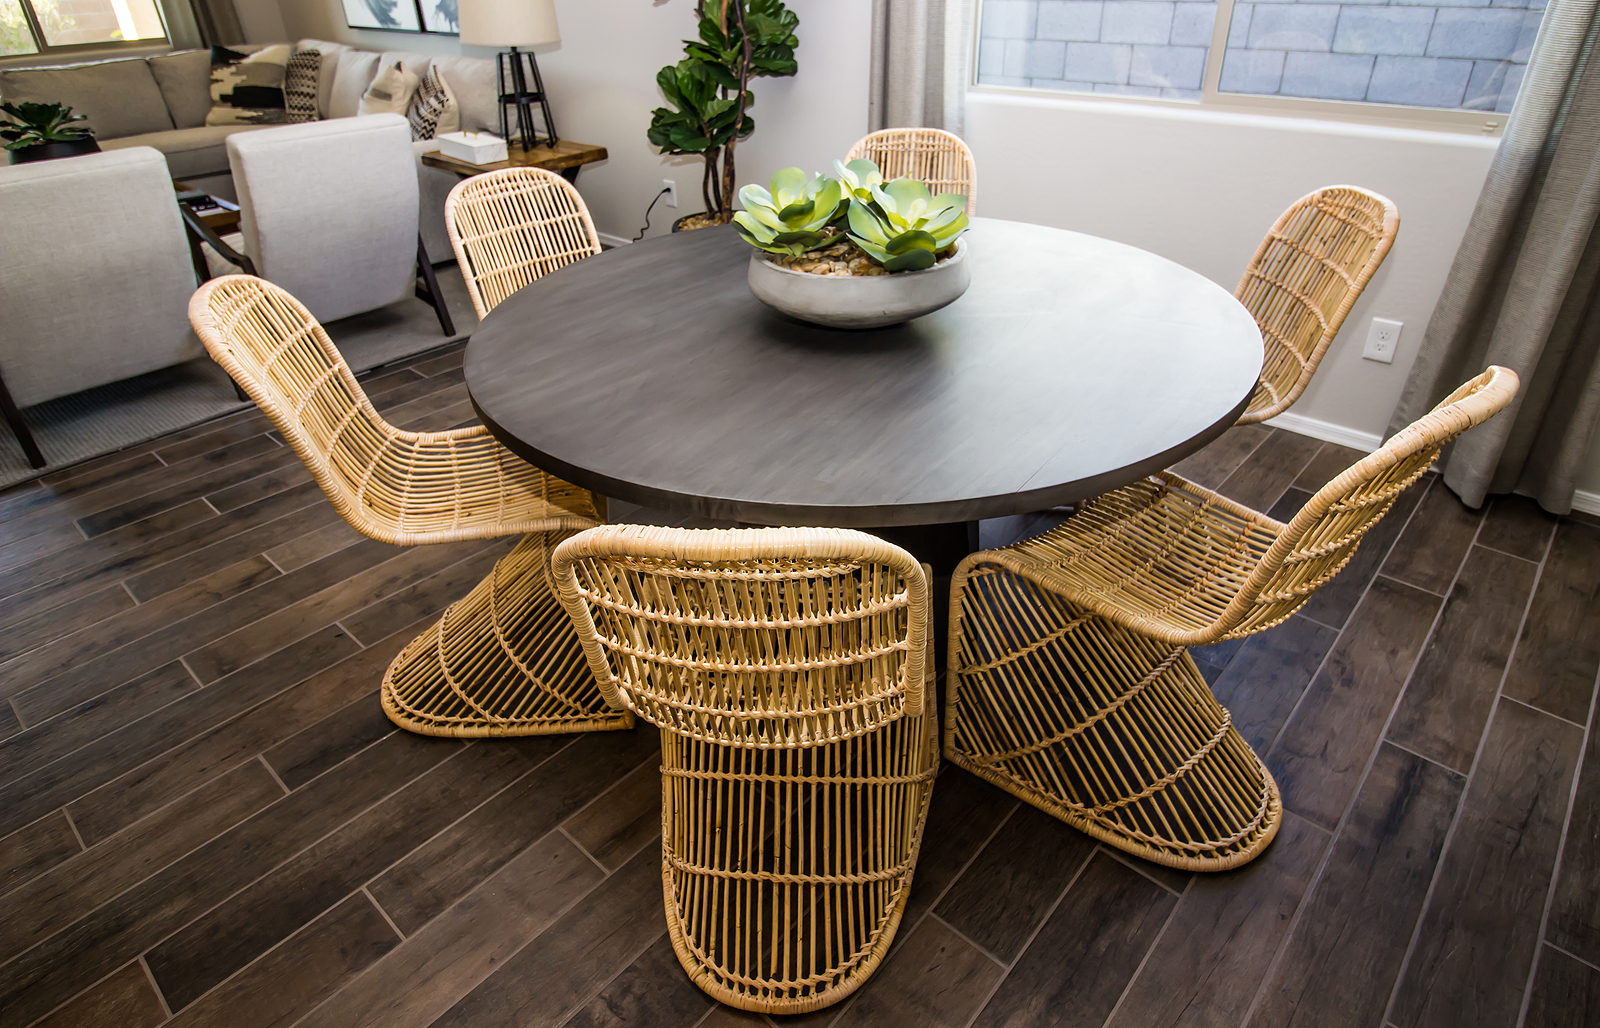 Round Wooden Table With Centerpiece And Wicker Chairs